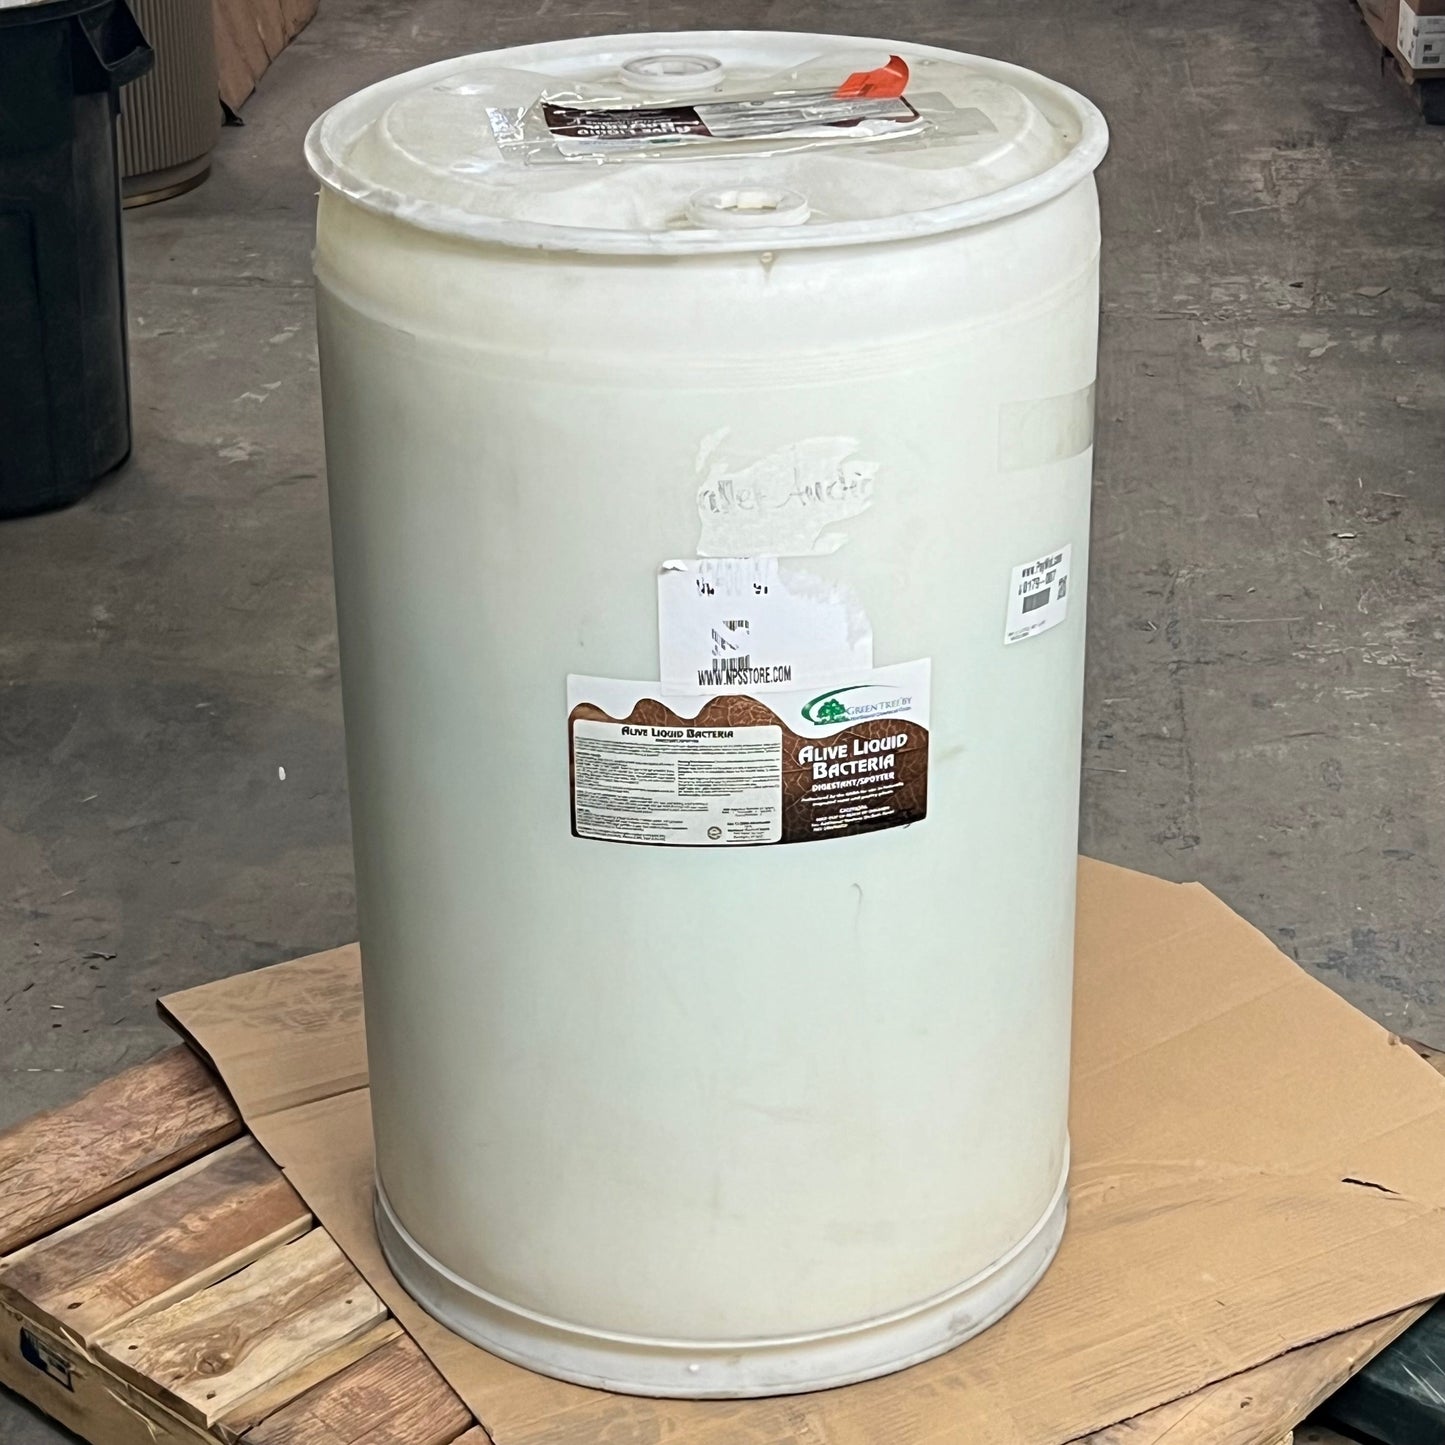 NORTHLAND CHEMICAL Alive Liquid Bacteria 55 Gallon Drum (AS-IS)